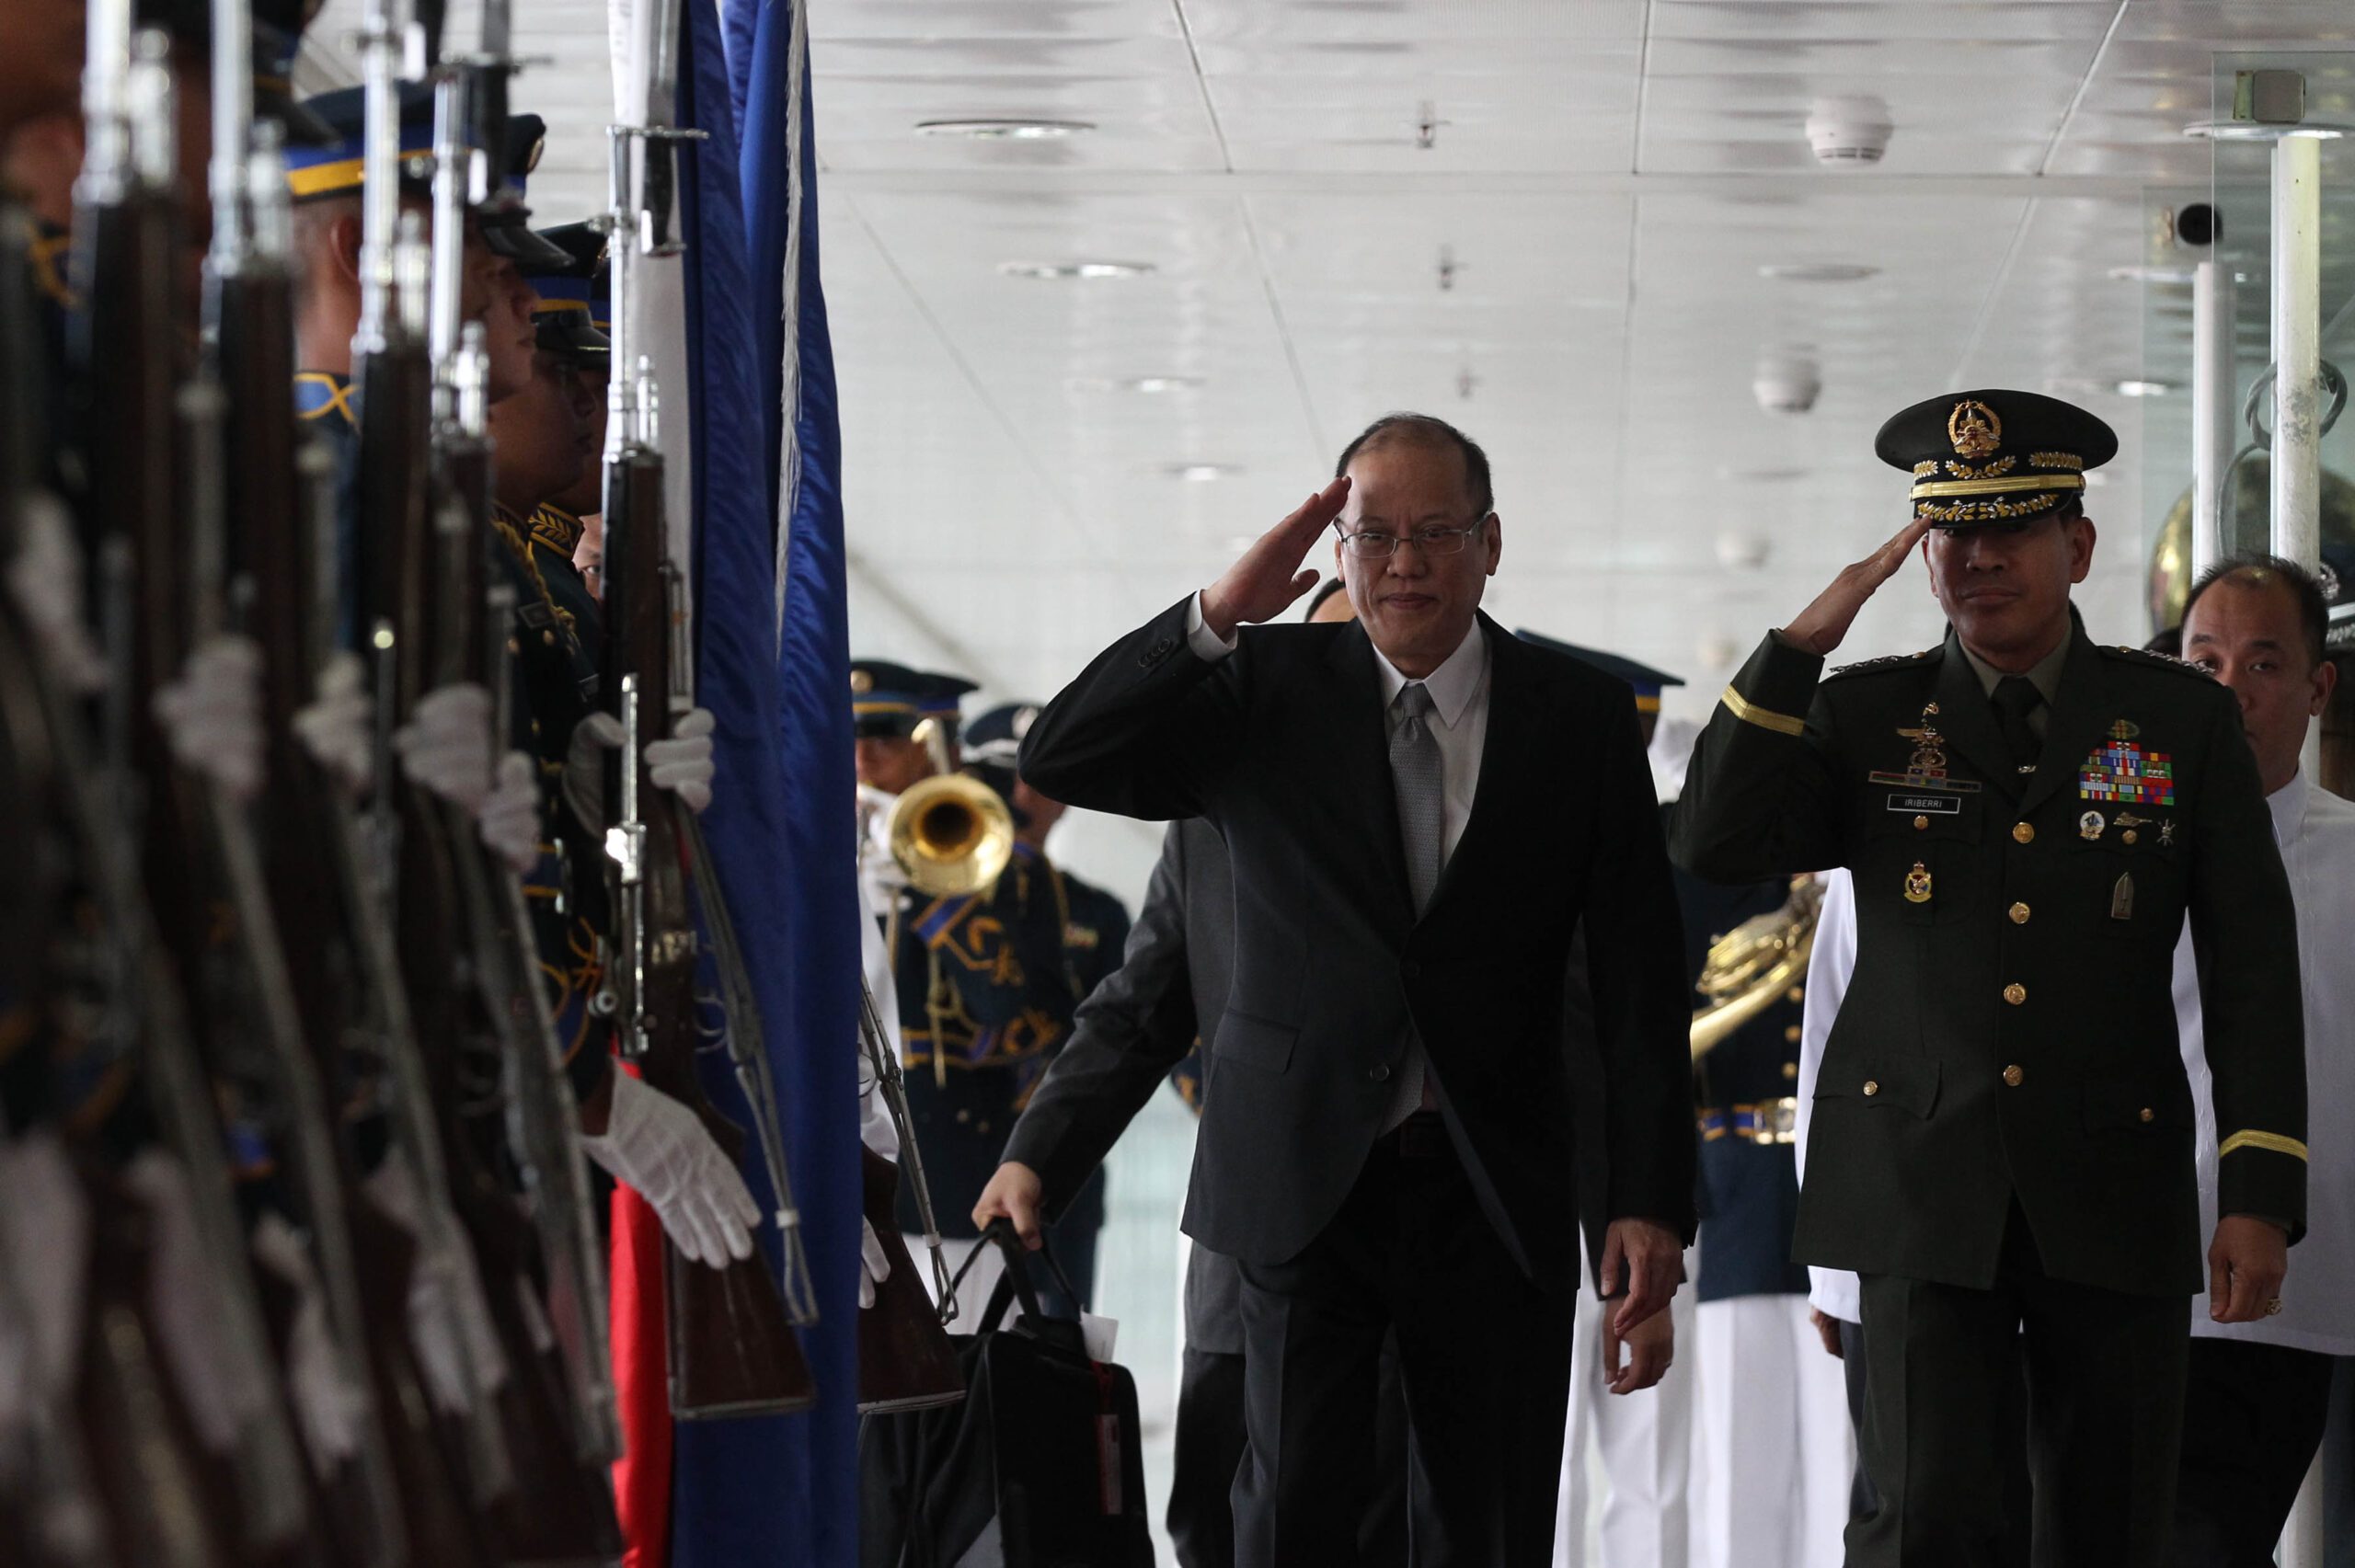 Aquino to thank ASEAN for help in disaster, promoting regional security